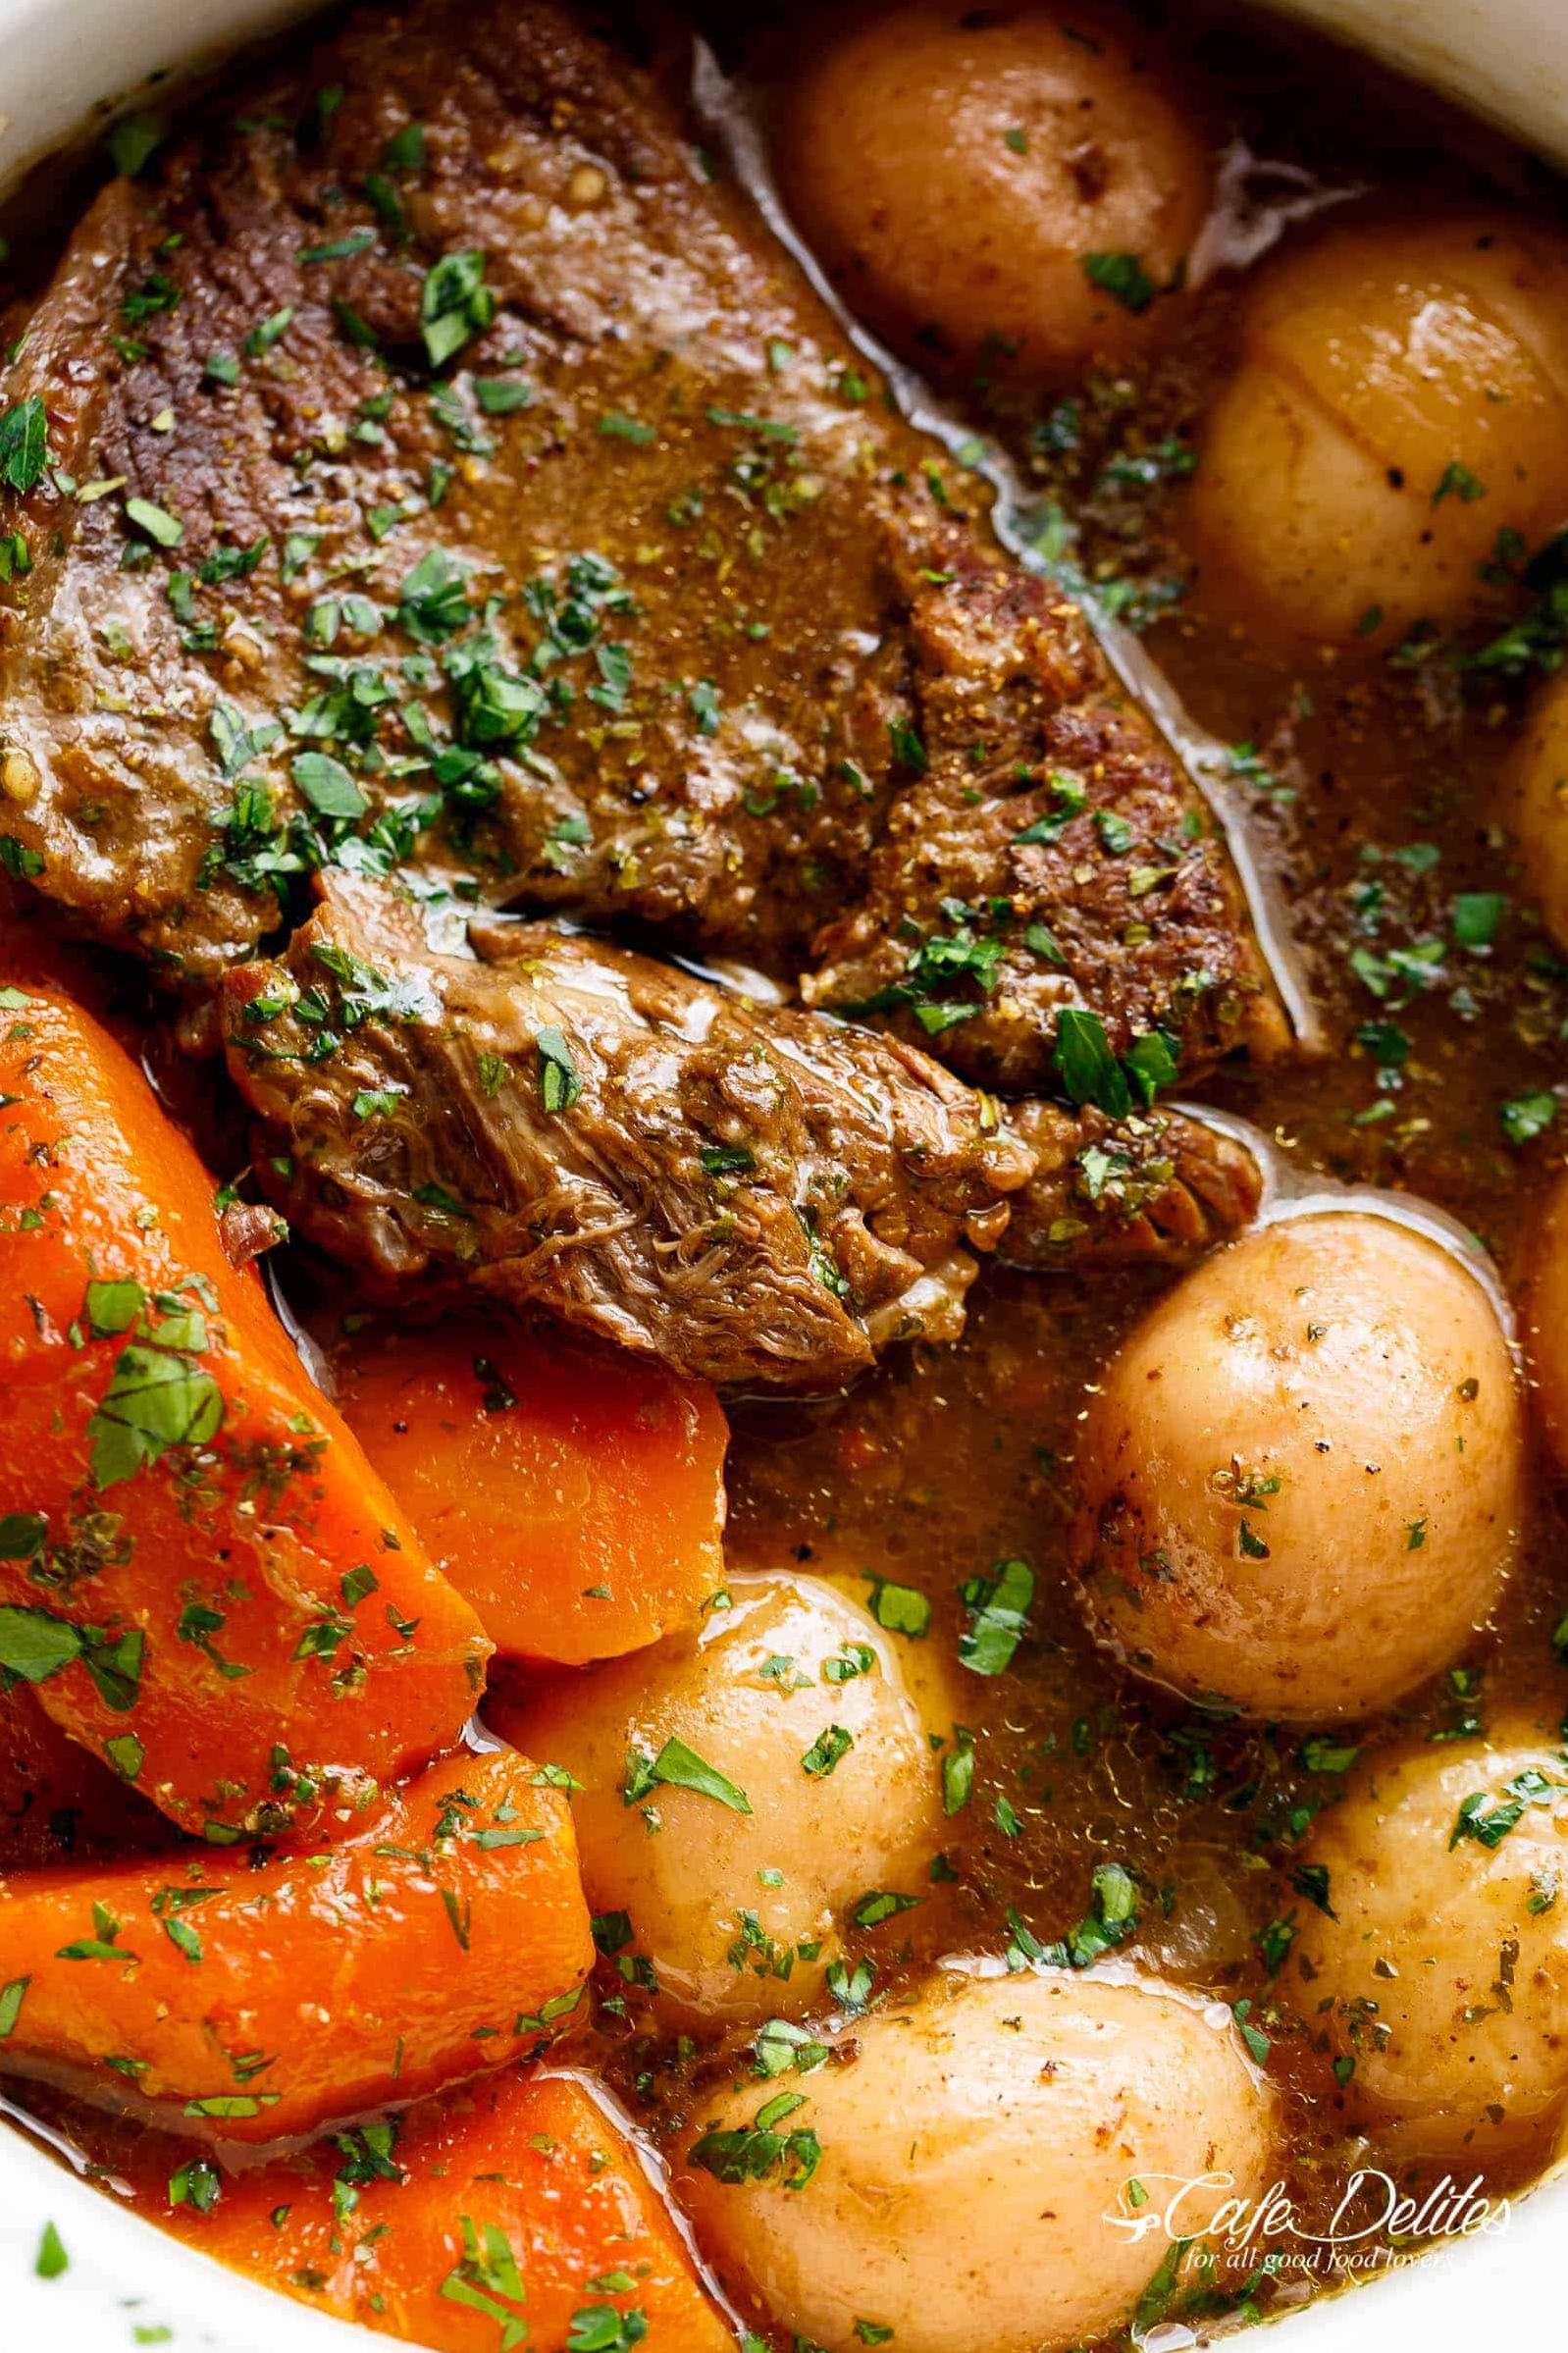  Let your crockpot do the heavy lifting with this mouthwatering roast!